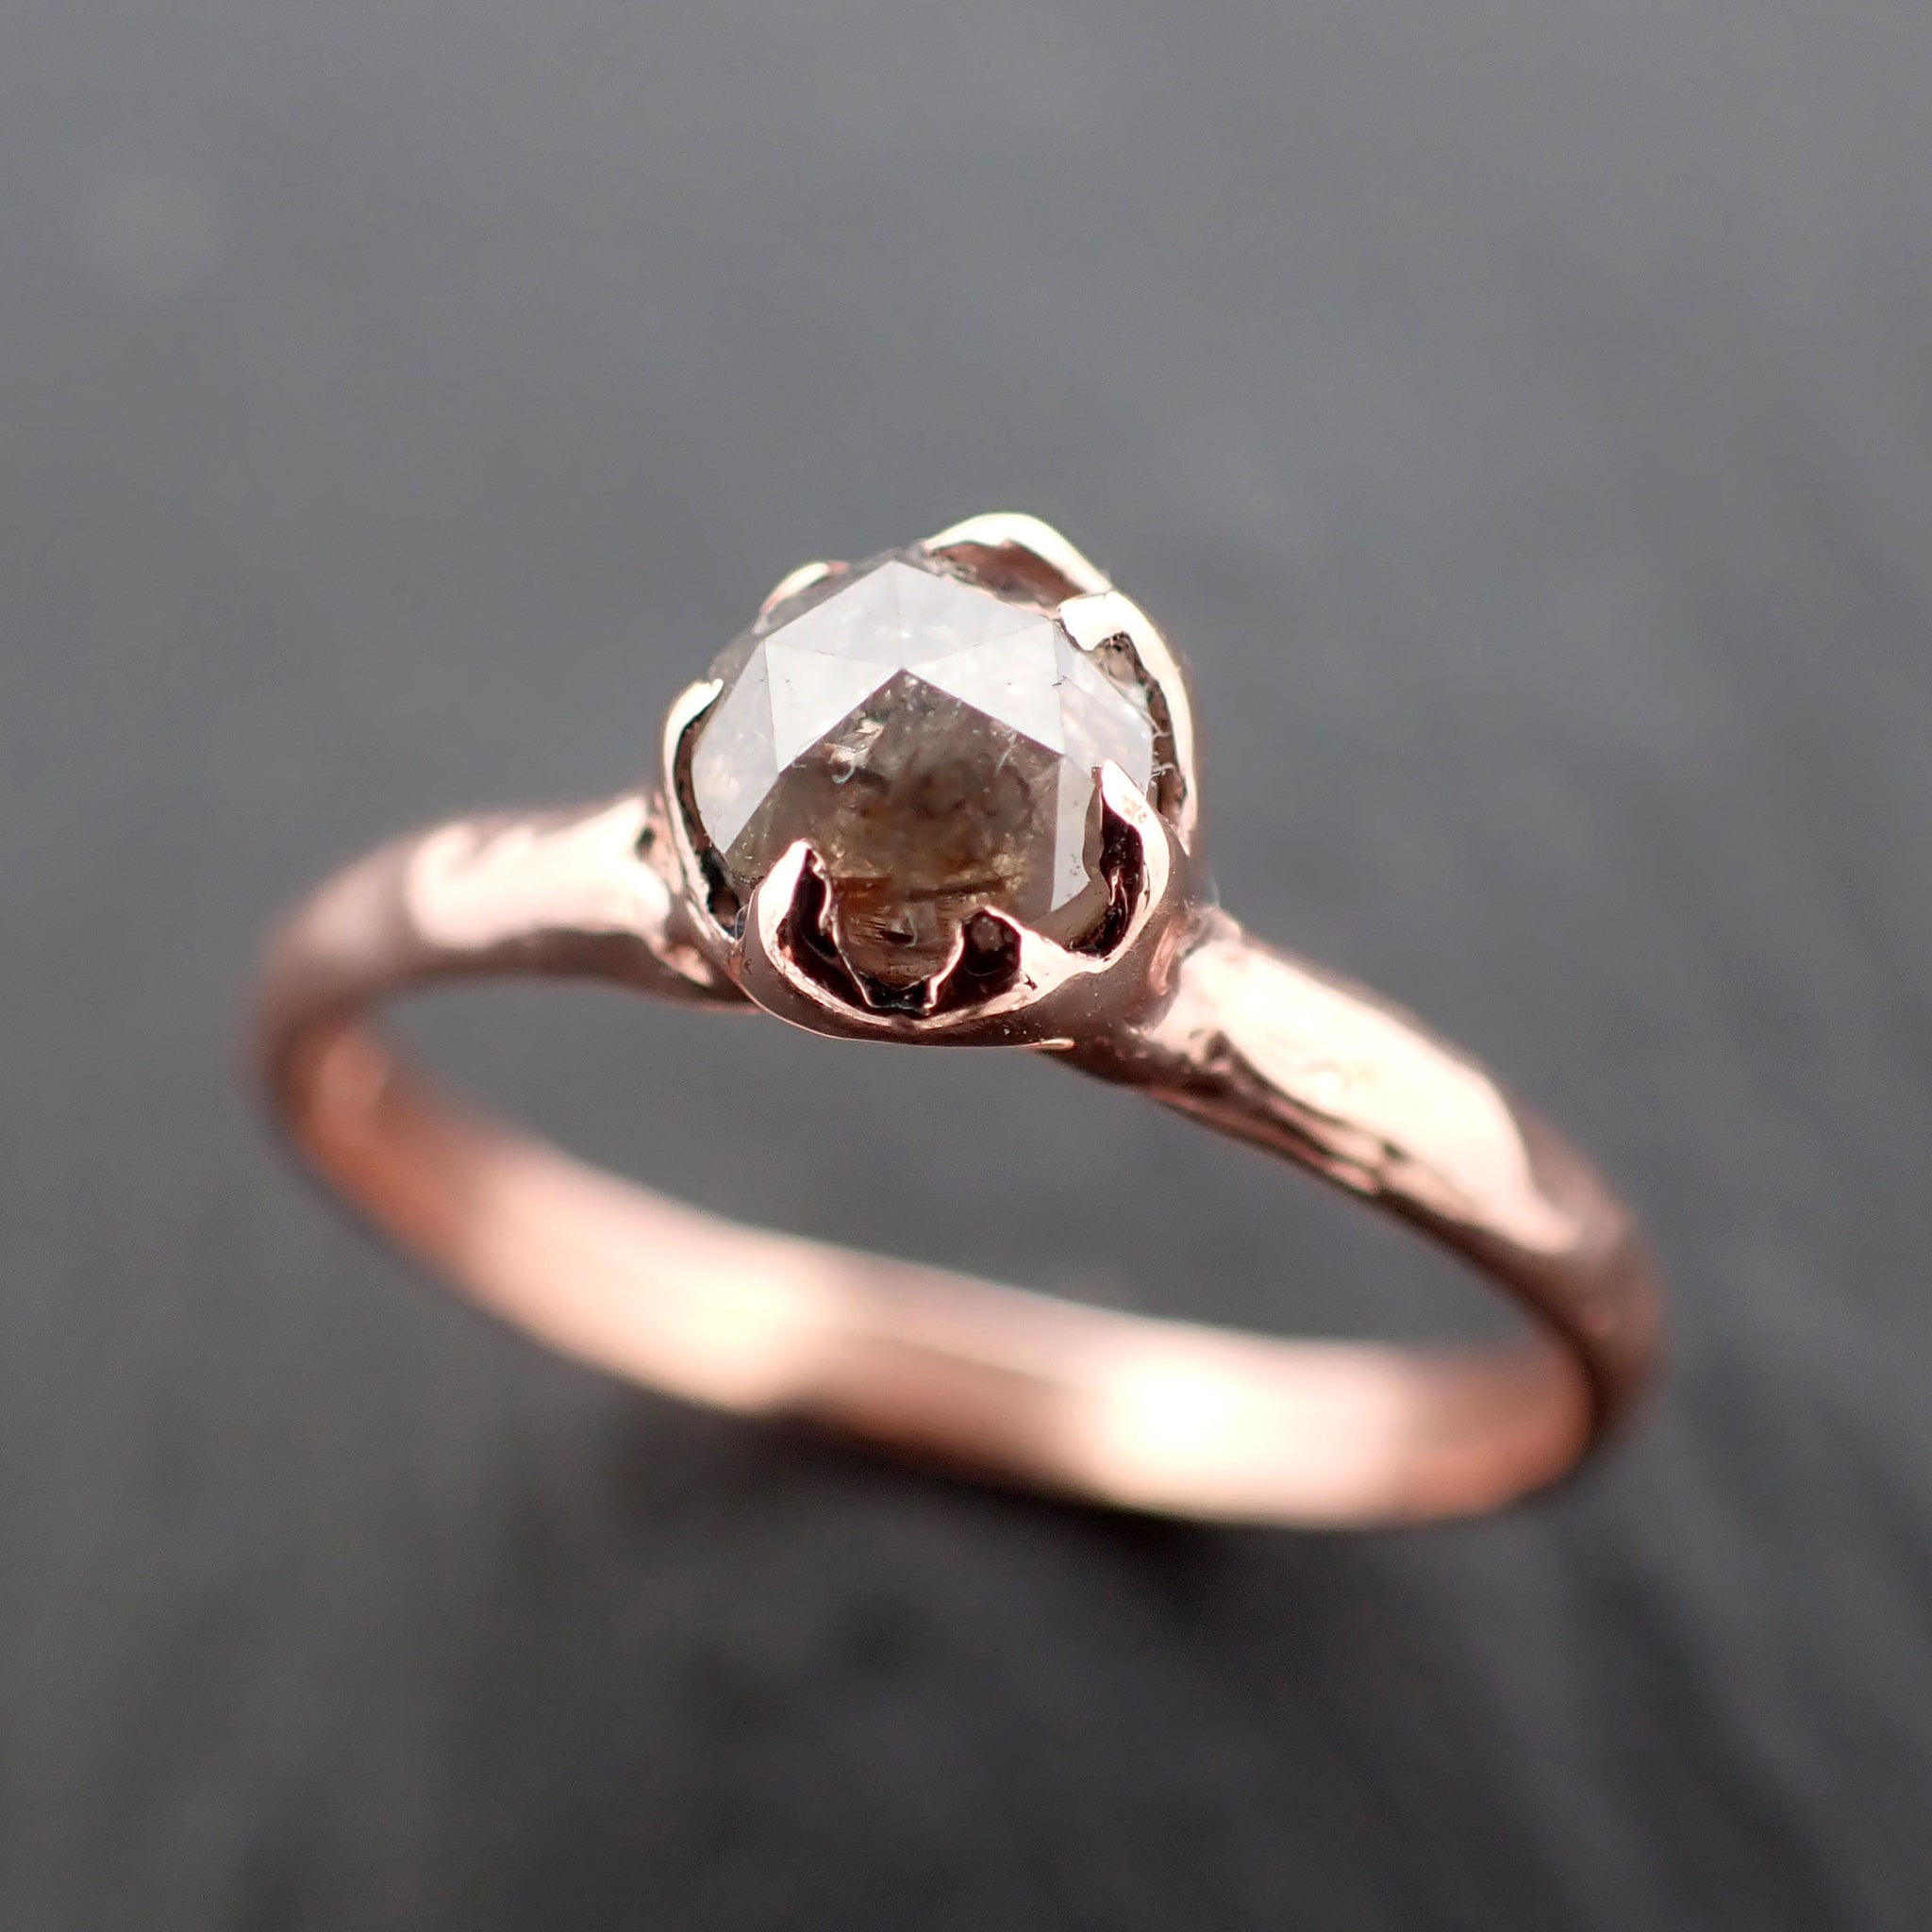 Faceted Fancy cut Champagne Diamond Solitaire Engagement 14k Rose Gold Wedding Ring byAngeline 3522